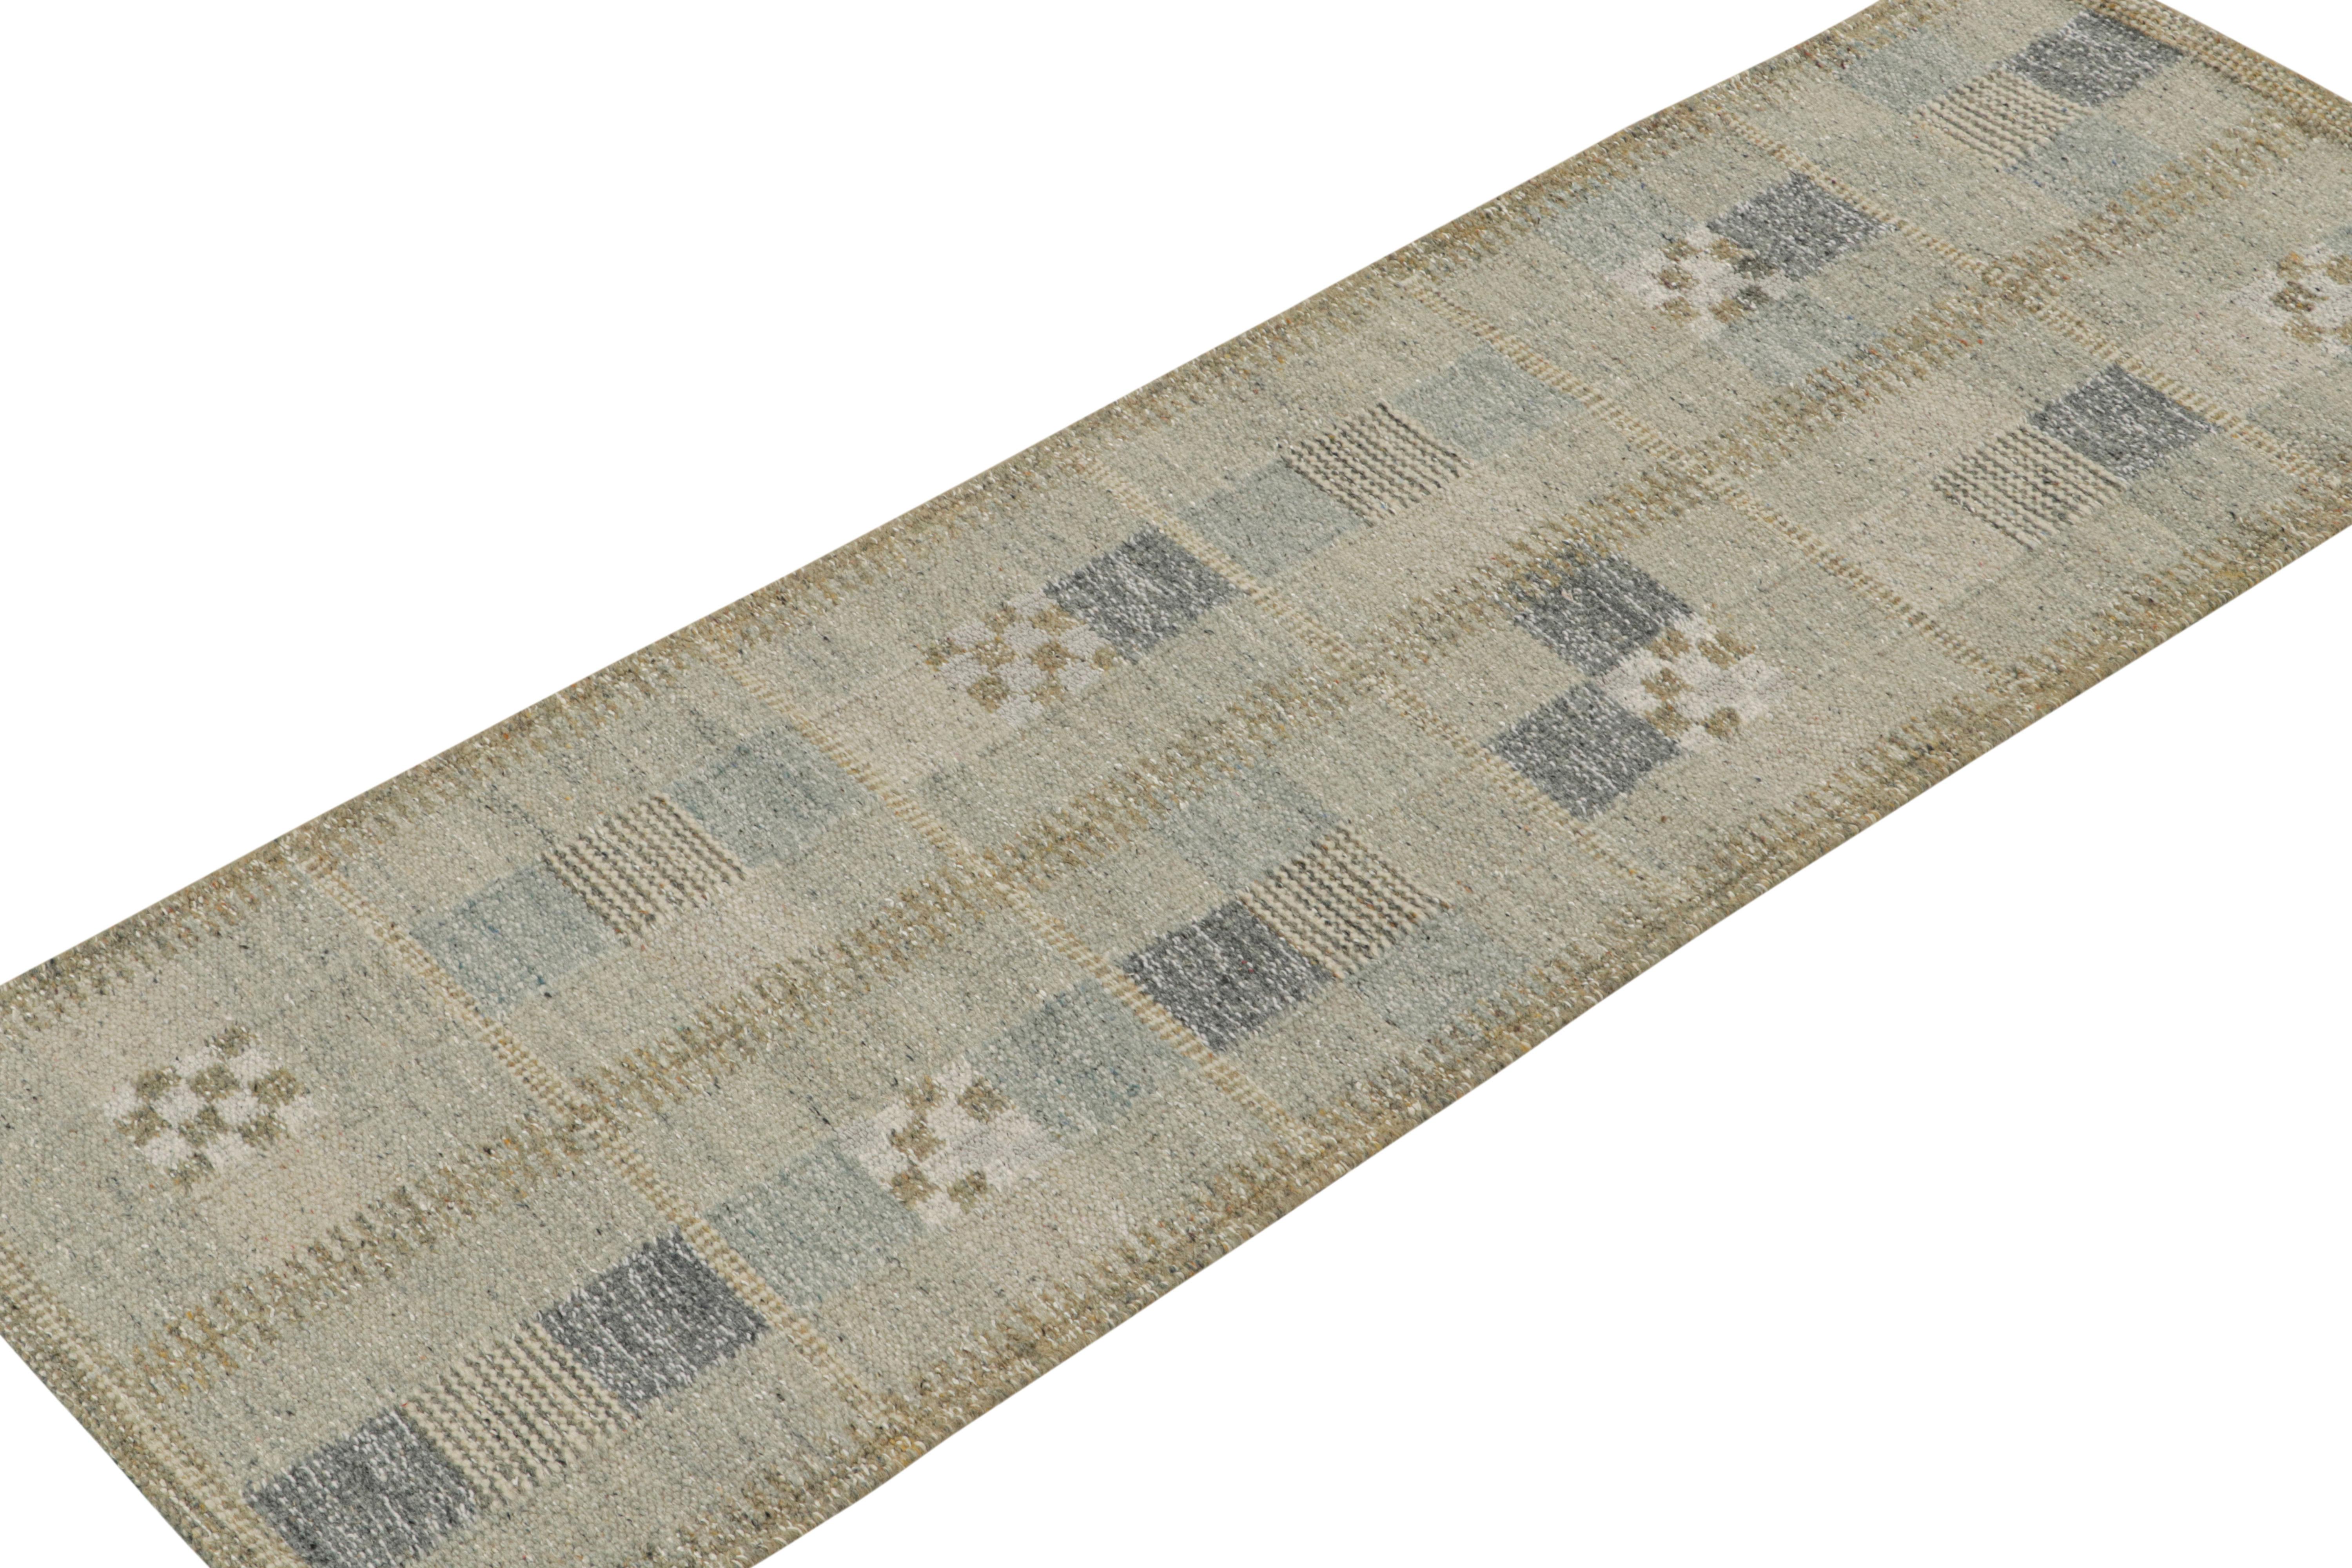 This 3x8 runner  represents the Scandinavian rug collection by Rug & Kilim. Handwoven in wool and undyed natural yarns, its design is inspired by Swedish rugs in the Rollakhan and Rya rugs in the Swedish Deco style. 

On the Design: 

Light blues